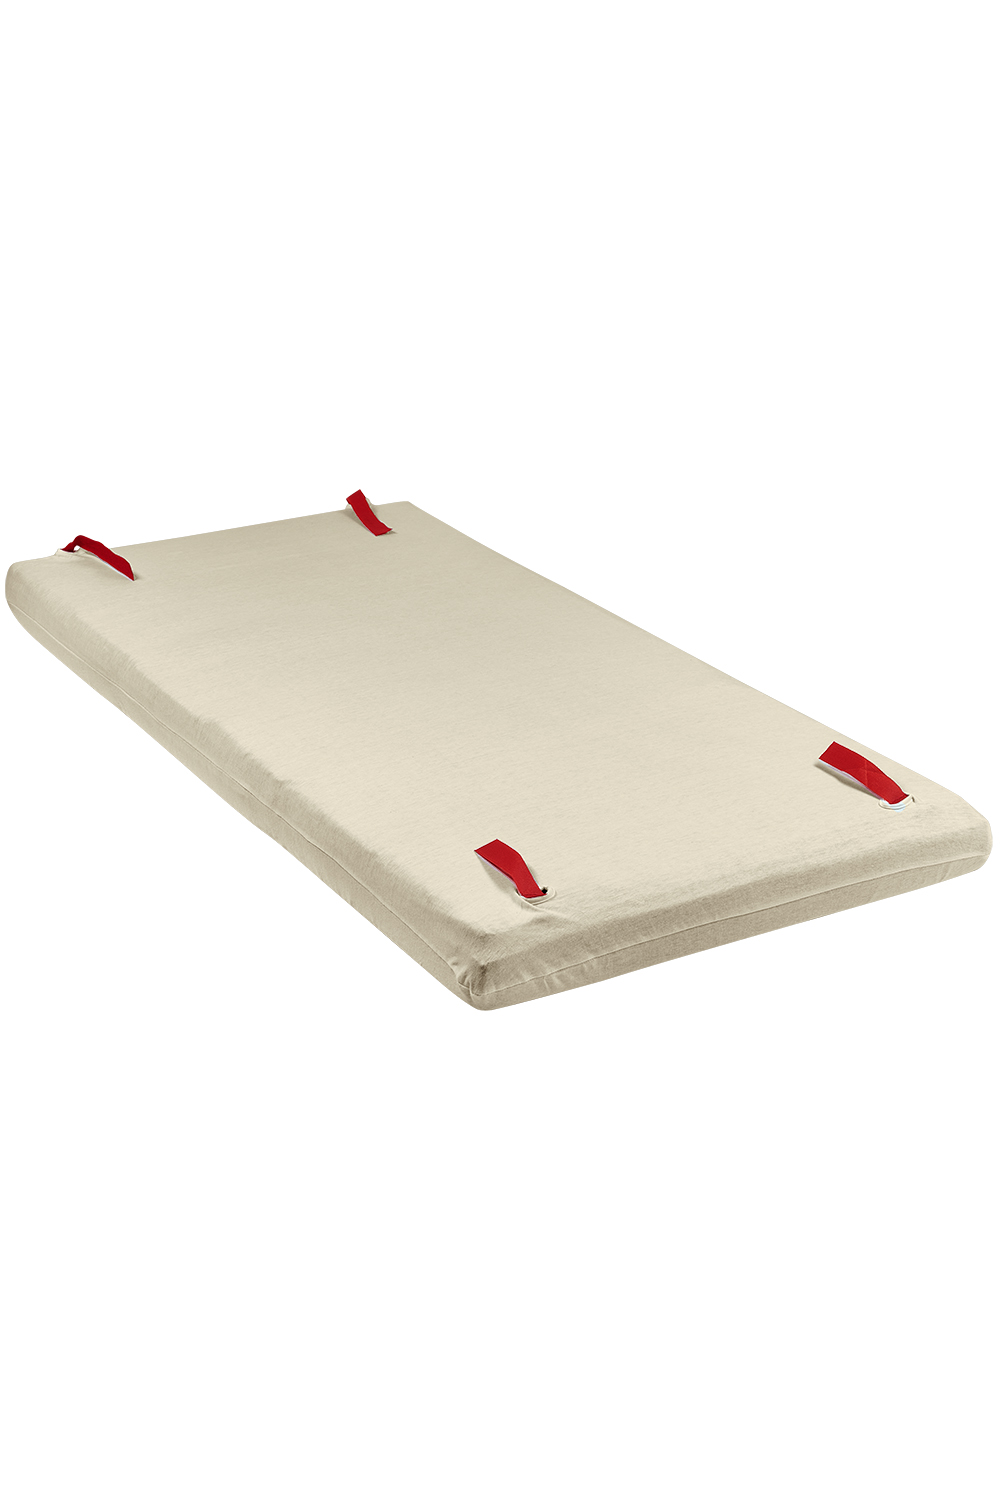 Jersey Campingbed Matrashoes DeLuxe - Sand - 60x120cm 